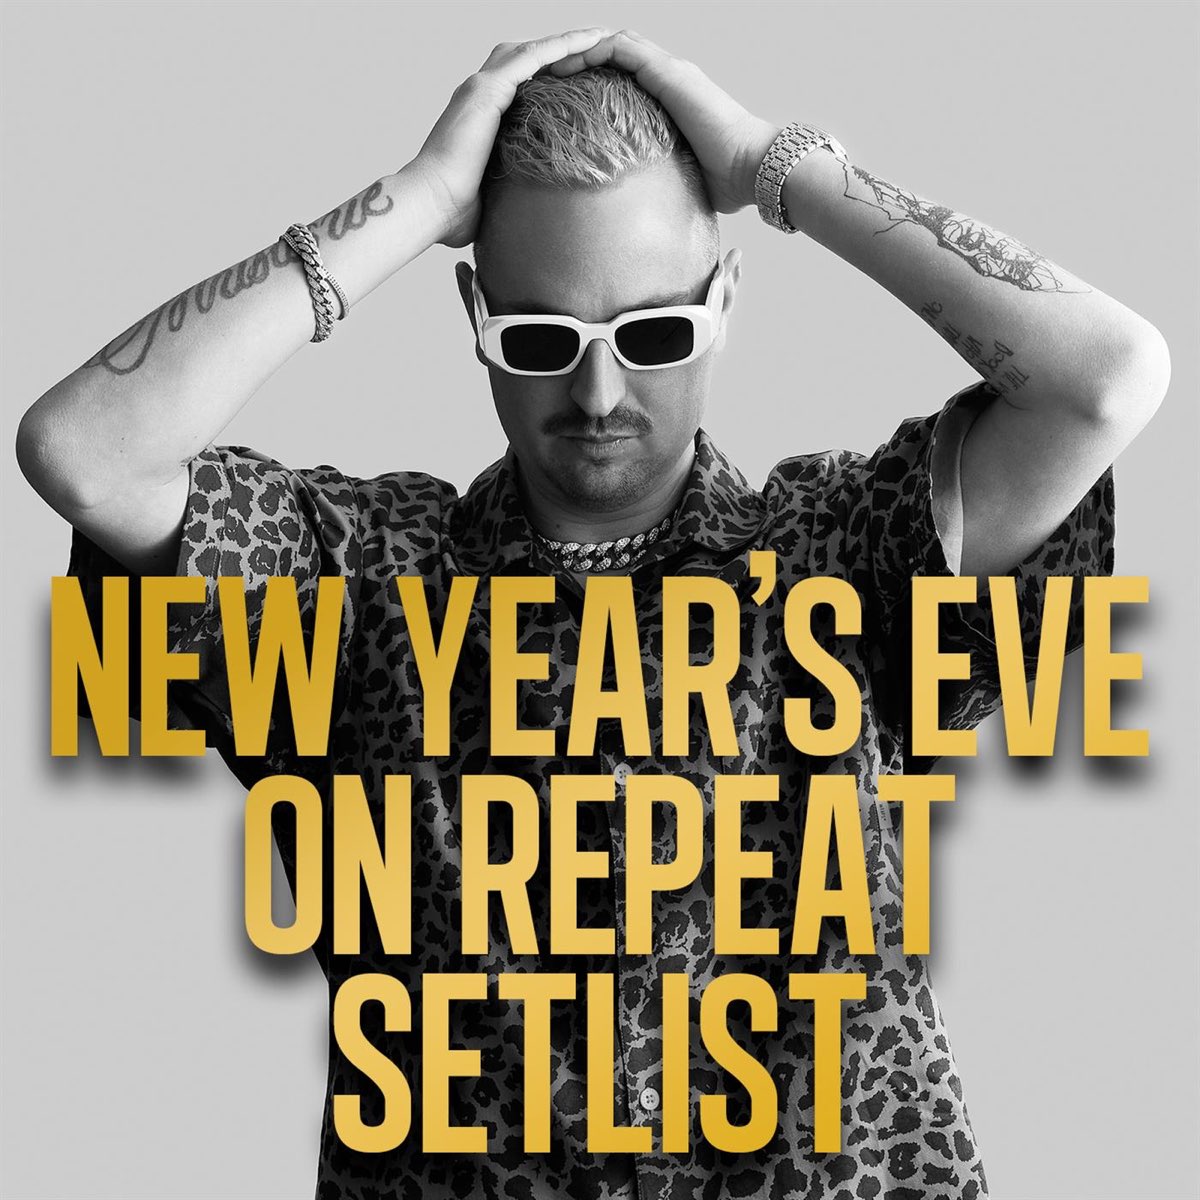 New Year's Eve on Repeat Setlist by Robin Schulz on Apple Music